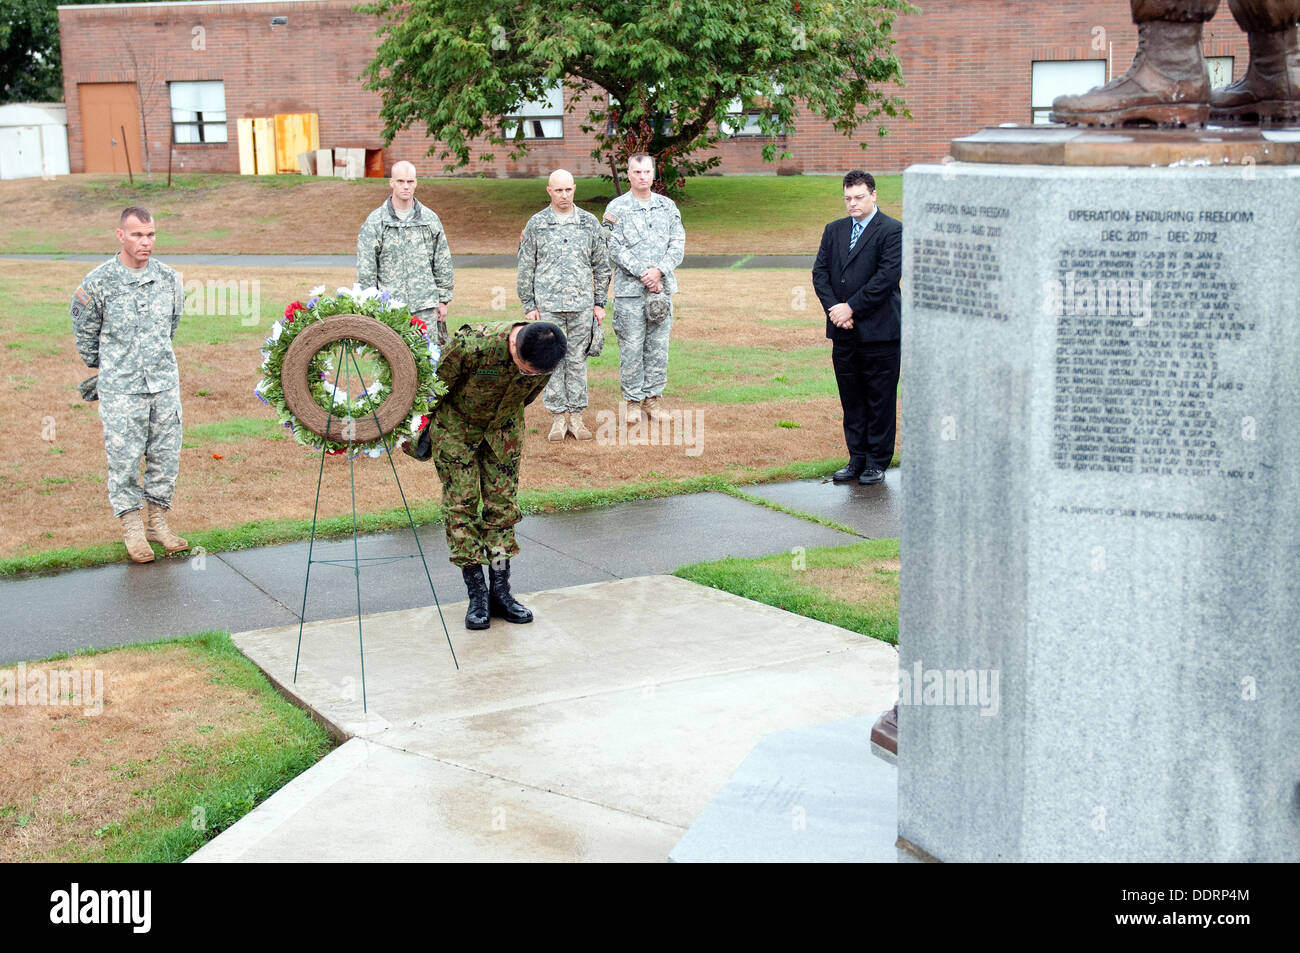 Maj. Gen. Omori (center), deputy commanding general, 4th Division, Northern Army, Japanese Ground Self-Defense Force, bows before the Arrowhead Brigade Memorial as a sign of respect to the fallen Soldiers of the Arrowhead Brigade, Sept. 3, 2013. Soldiers Stock Photo